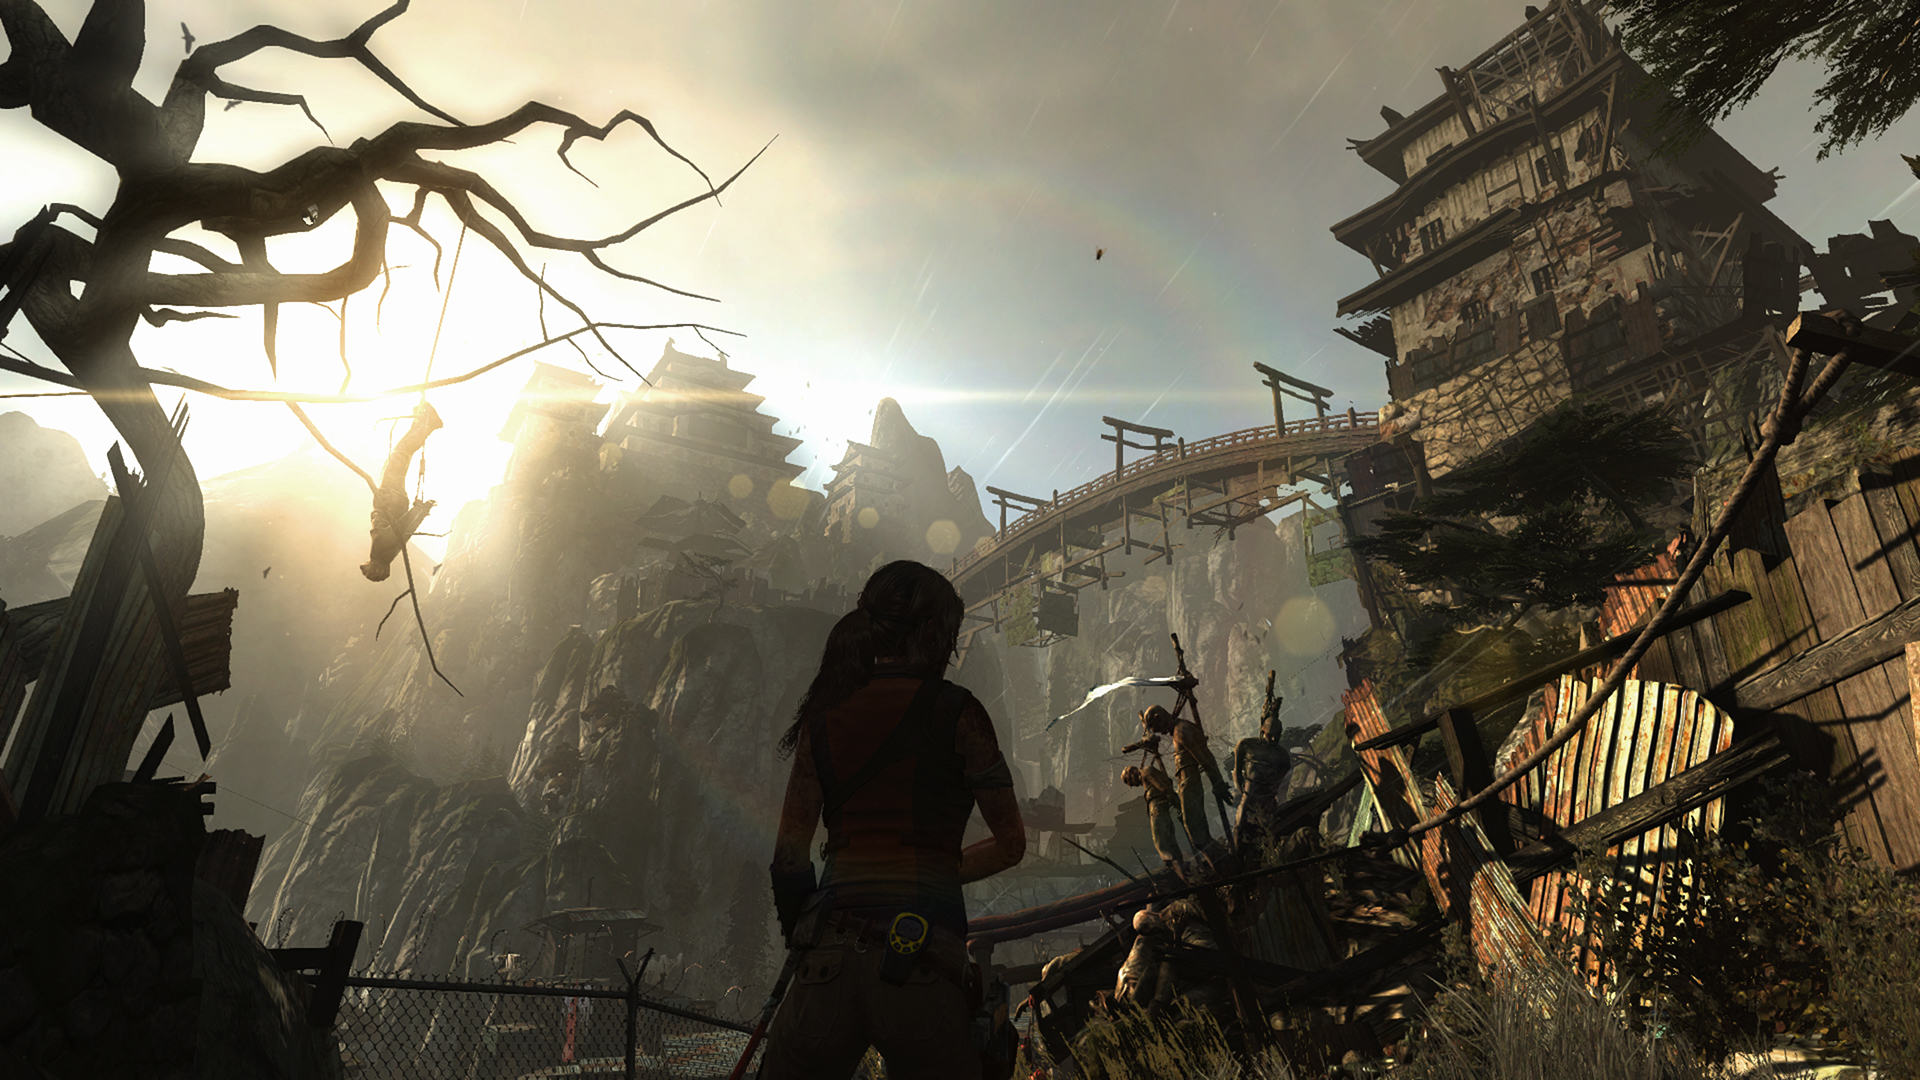 Lara Croft silhouette and Japanese buildings in the background.